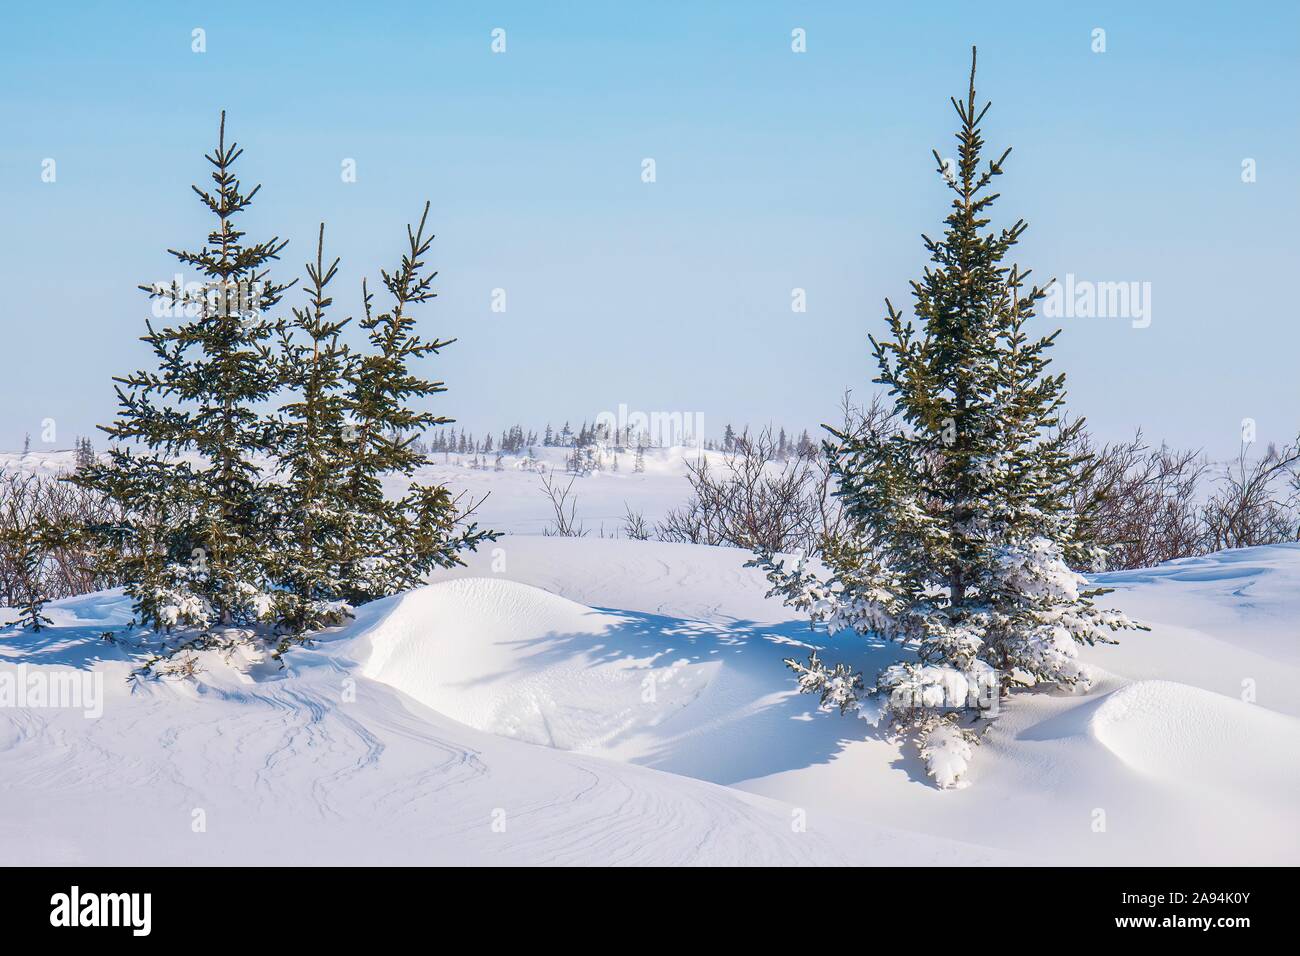 A snowy winter landscape scene in northern Canada, with a few small black spruce trees standing in deep snow. Churchill, Manitoba. Stock Photo